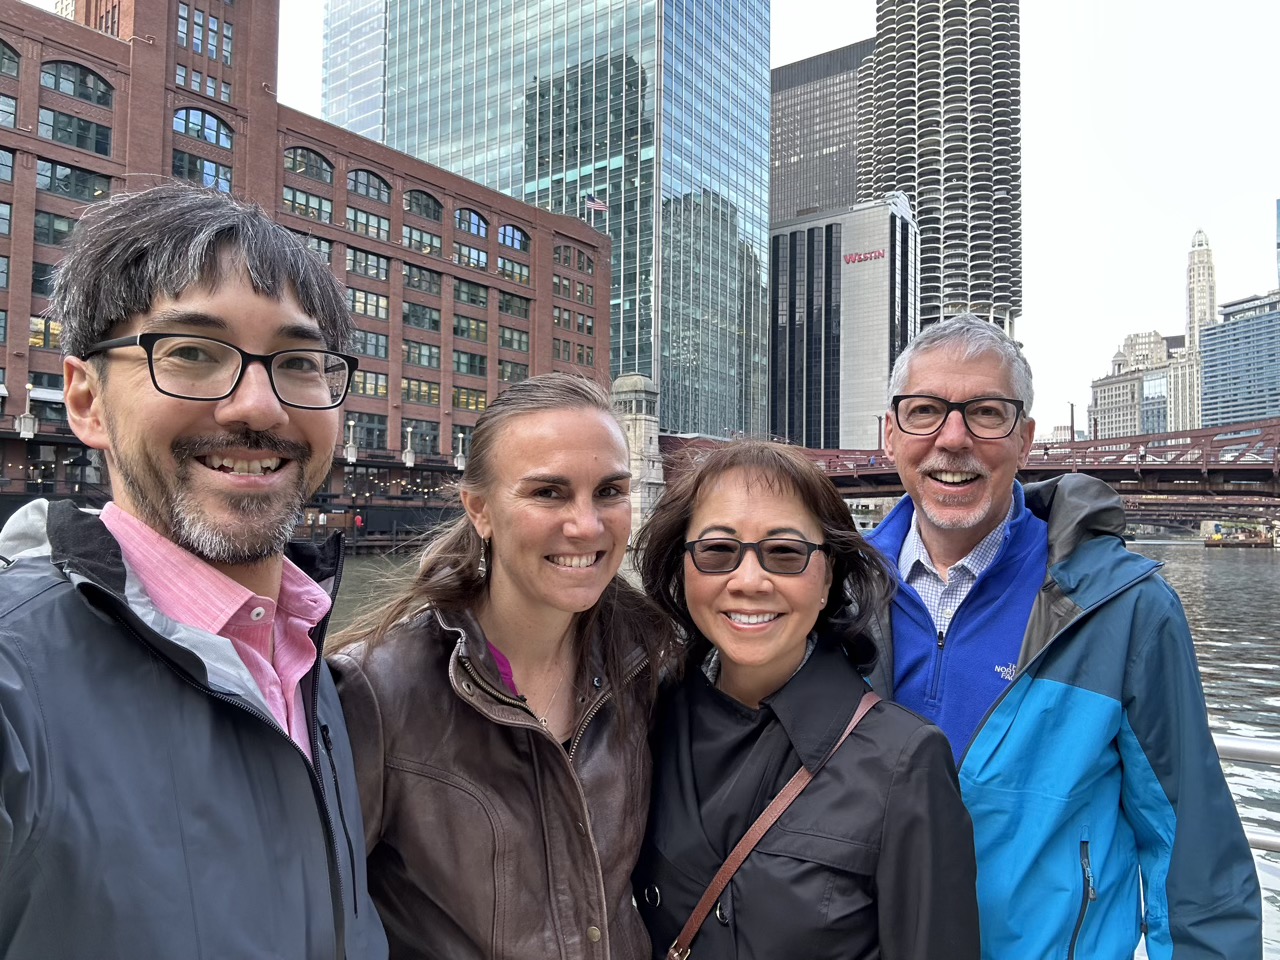 Benjamin, Cara, and the parents on the Chicago riverwalk